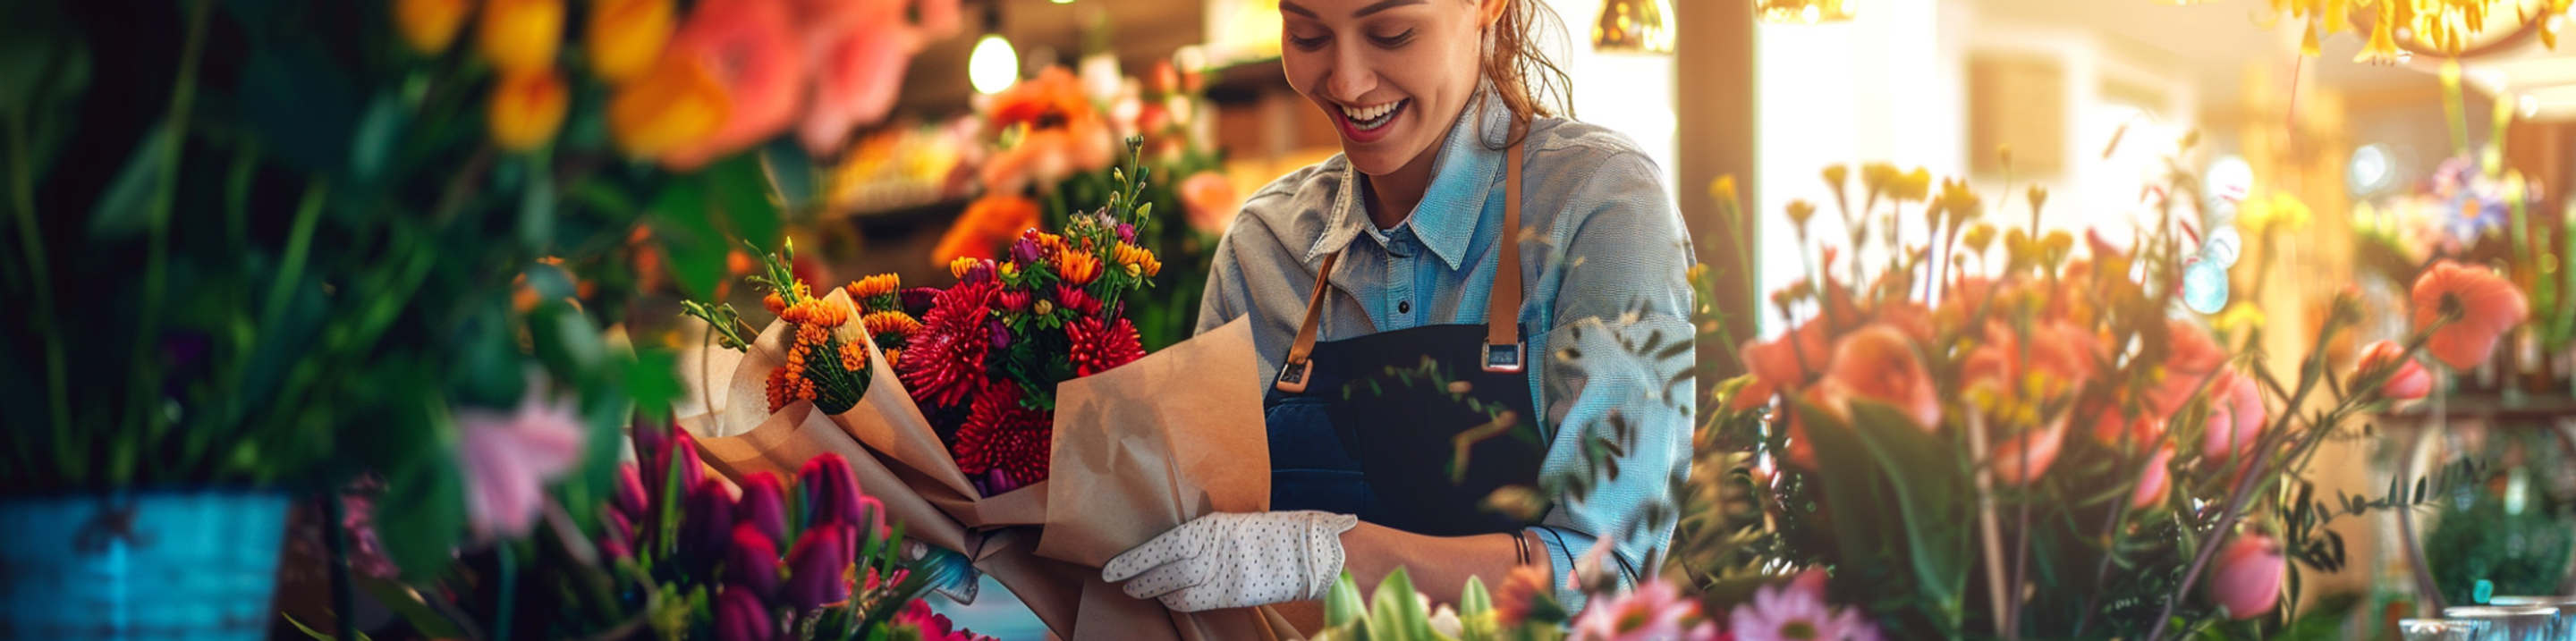 A joyful florist in a denim shirt and black apron, with white dotted gloves, prepares vivid red and orange bouquets wrapped in brown kraft paper in a sunlit flower shop. Foreground bursts with life showcasing a bokeh of pink and yellow blooms, while the florist's engaging smile reflects the swift and heartfelt service of express flower delivery.